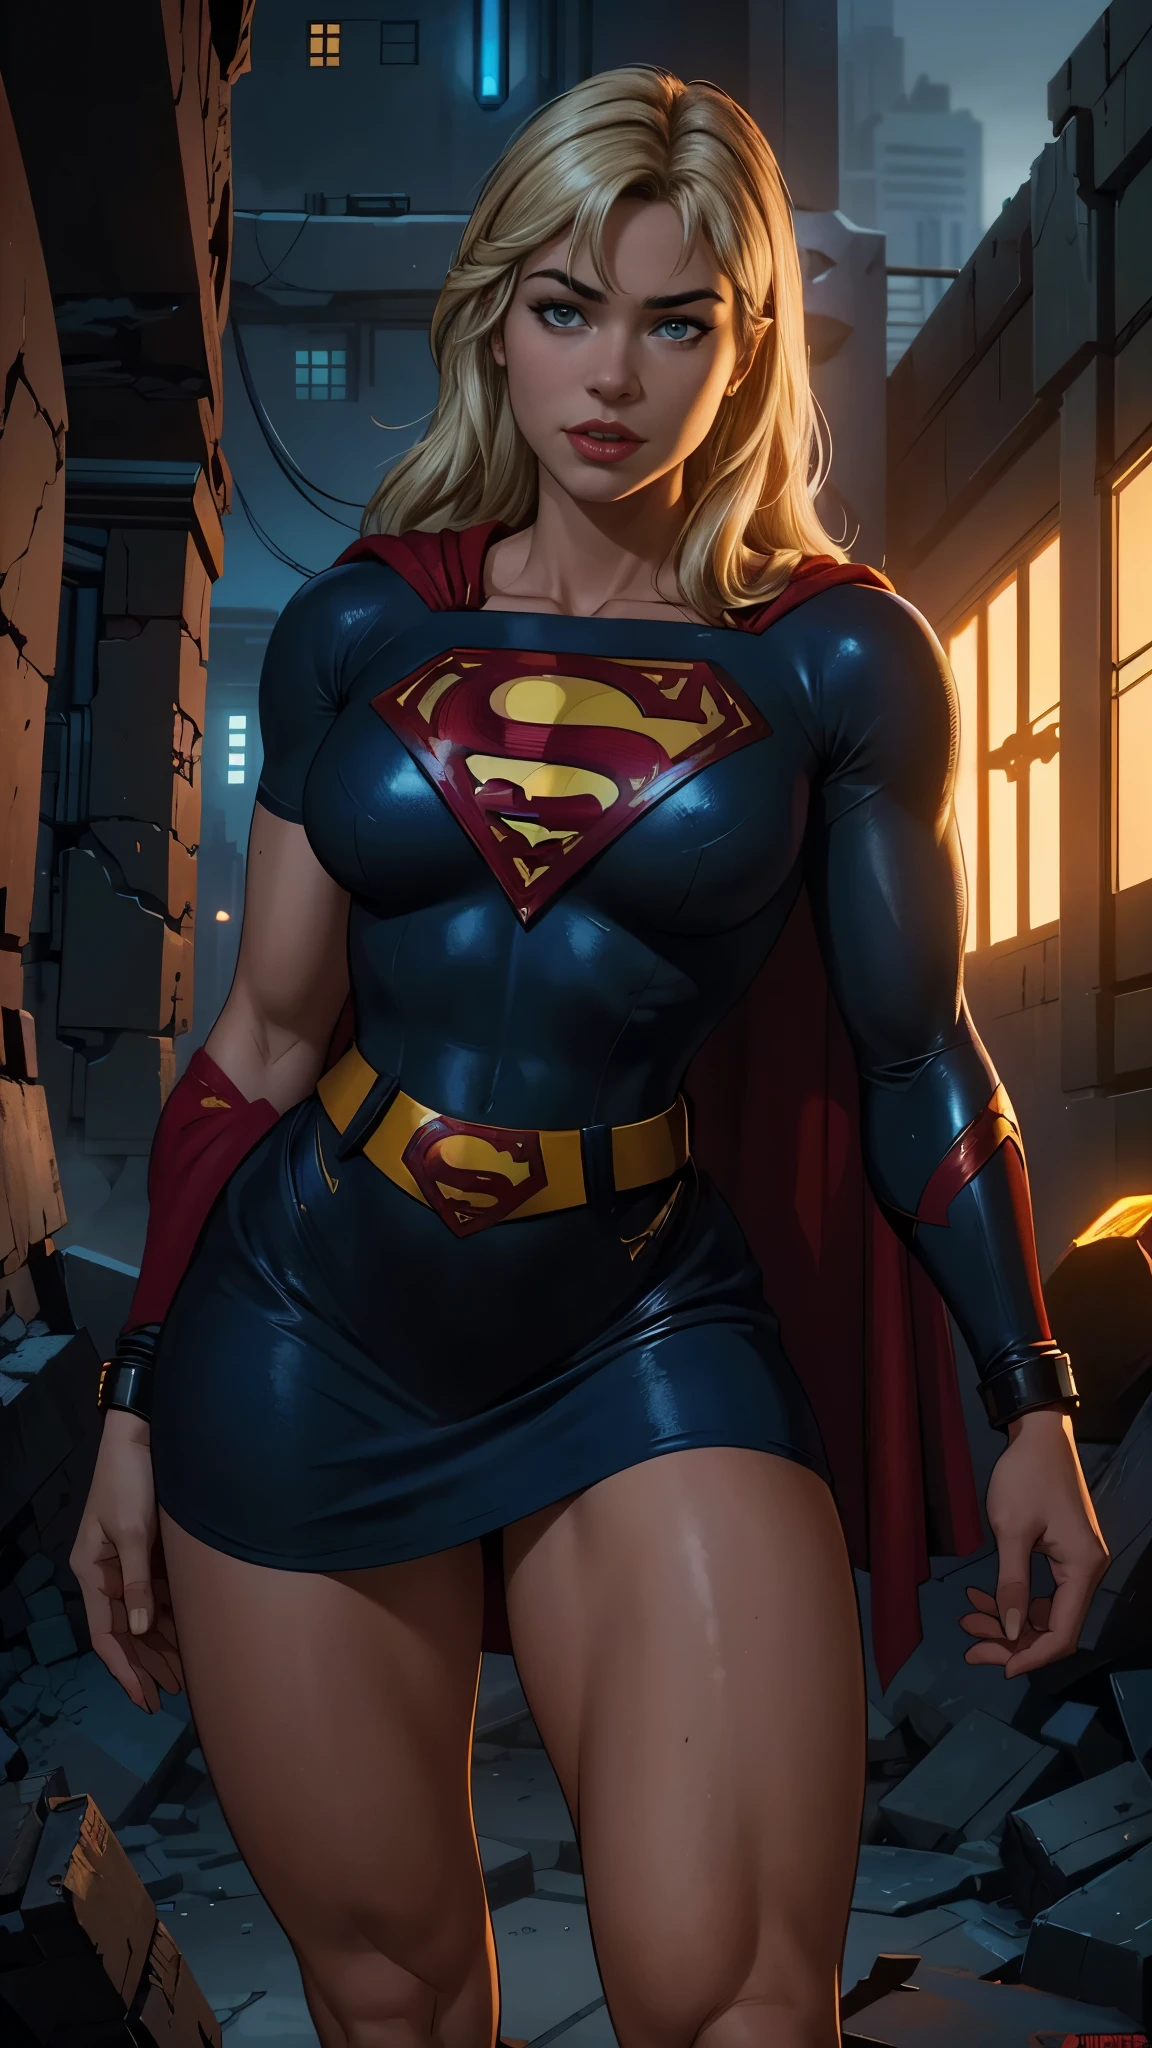 8K, Ultra HD, super details, high quality, high resolution. The heroine Supergirl looks beautiful in a full-length photo, her body is sculptural, her long wavy blonde hair is radiant in a perfect combination with her white skin, her bright blonde eyes mesmerize everyone. She is wearing her heroine outfit, a red skirt with a yellow belt, a very tight blue t-shirt with a big red S on the chest, Elta also wears a red cape and red boots. she looks very sexy drawing attention to her big breasts and thick legs as she flies through the sky.,(Fondo de ruinas de mazmorra en ruinas cyberpunk :1.4 ), (supergils superman :1.4) 